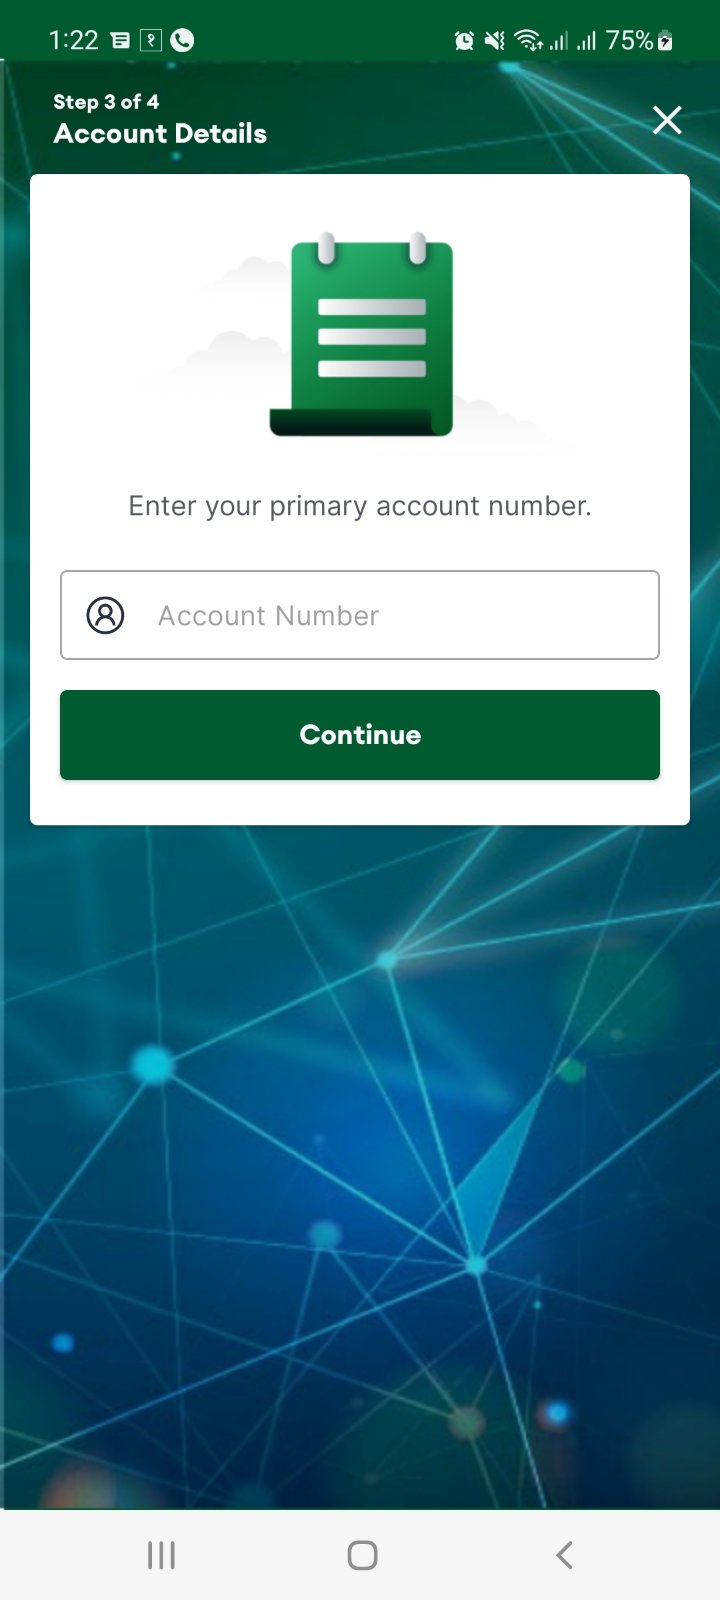 Enter Account Number - Image